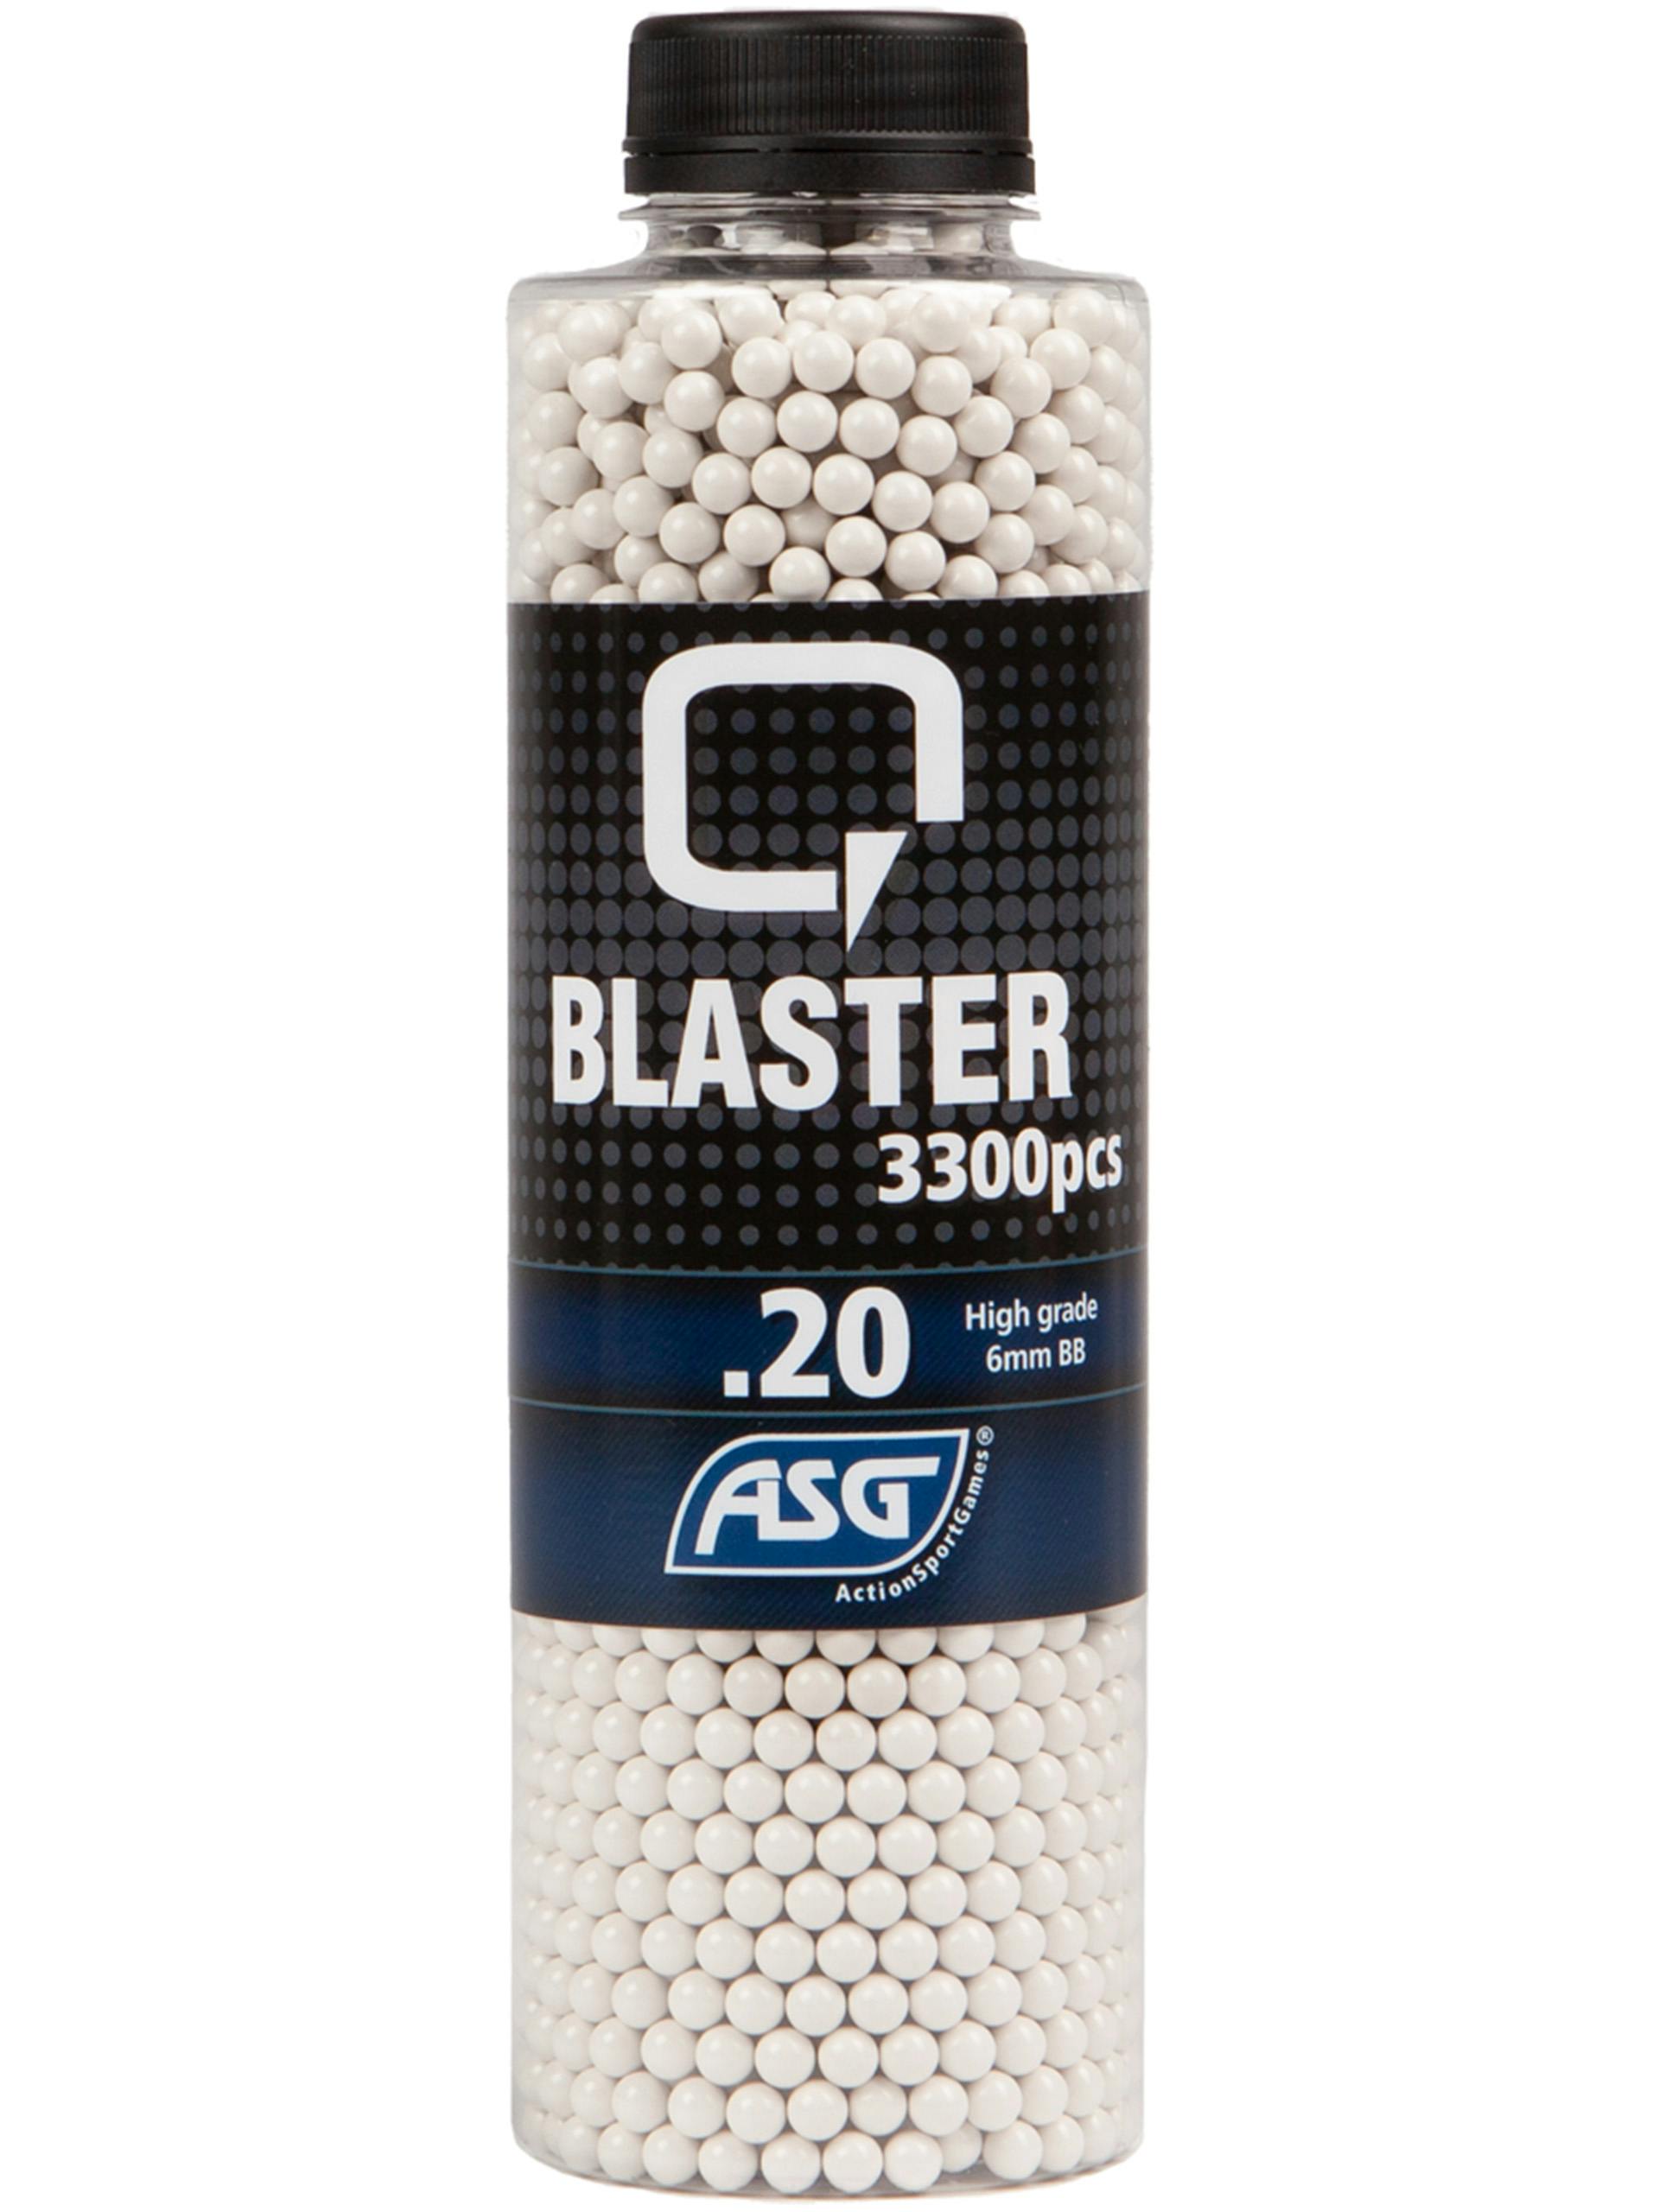 Airsoft BB Pellets 6mm BBs 0.20g High Grade Smooth Polished